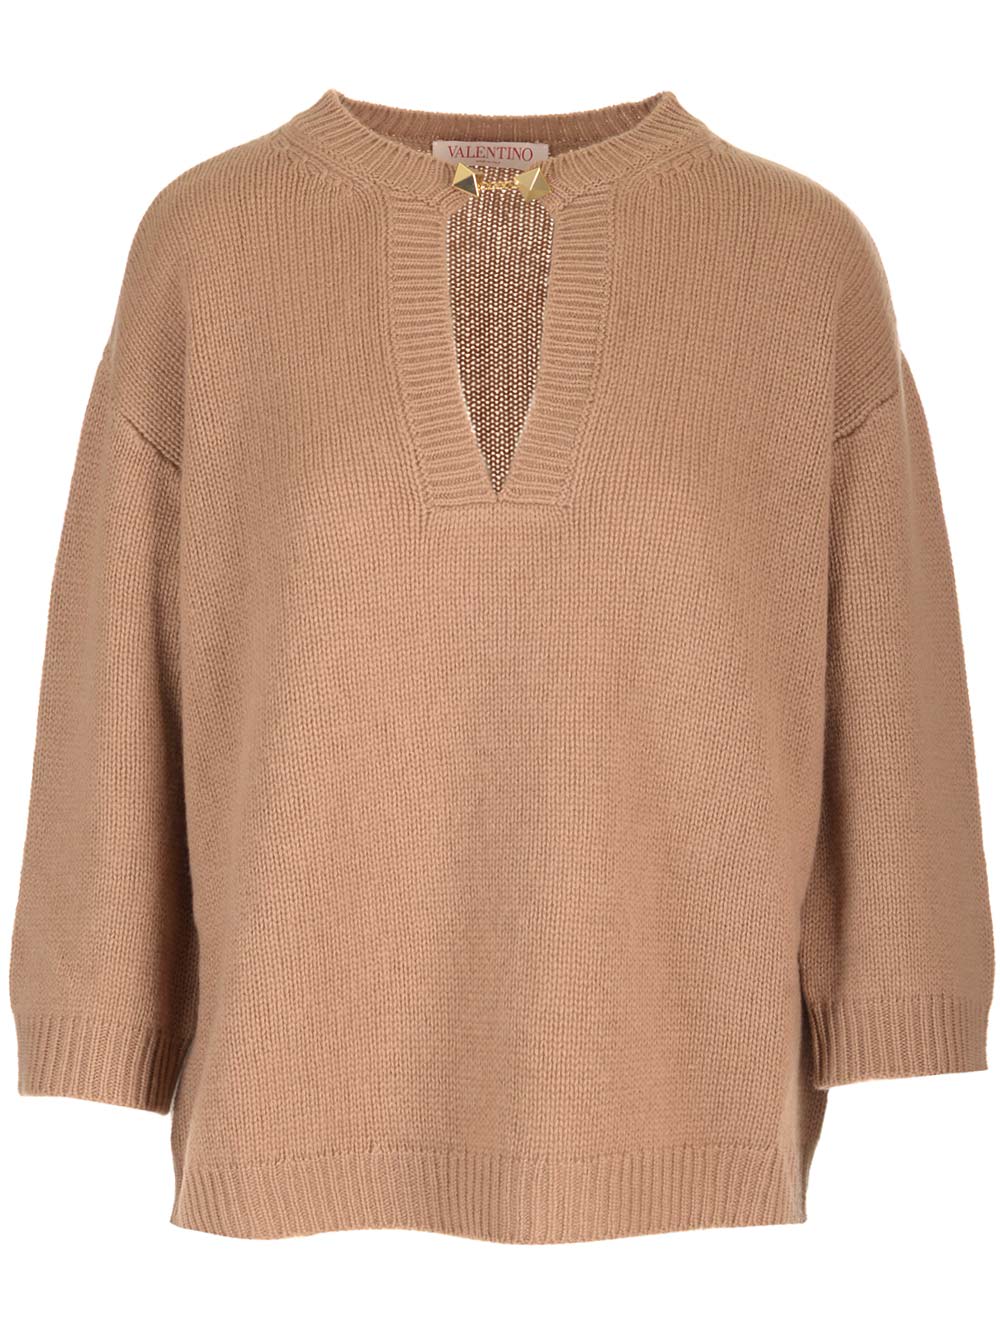 VALENTINO SWEATER WITH STUD DETAIL